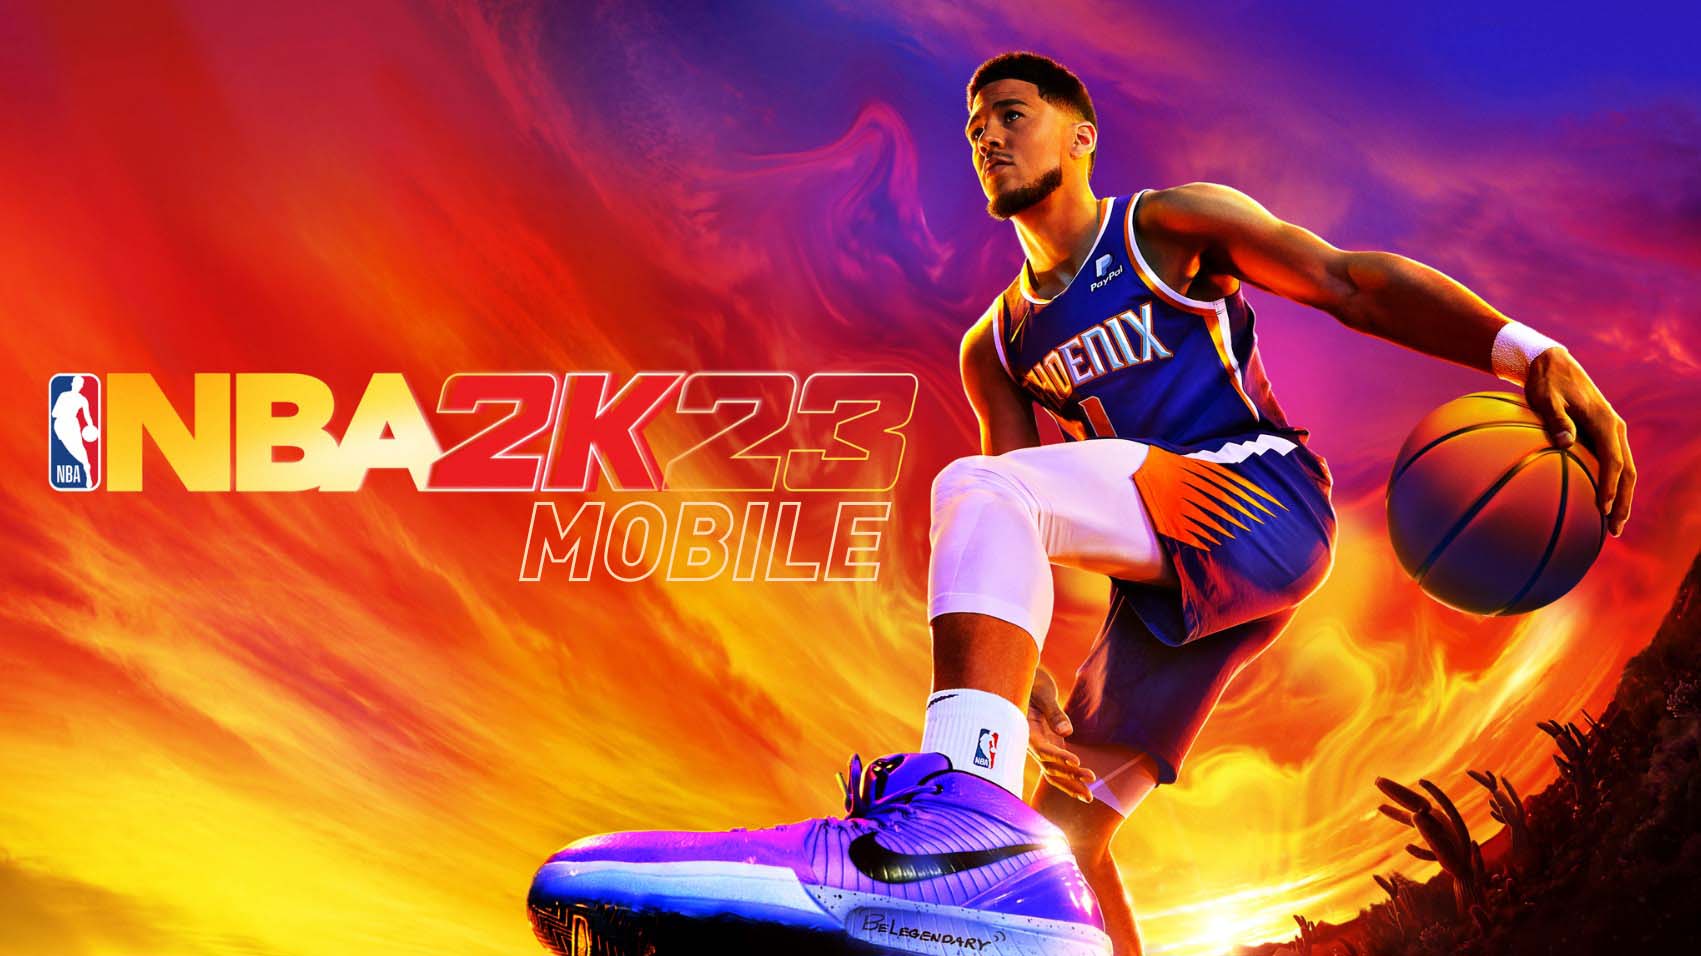 Download NBA 2K23 for Android or iOS devices.